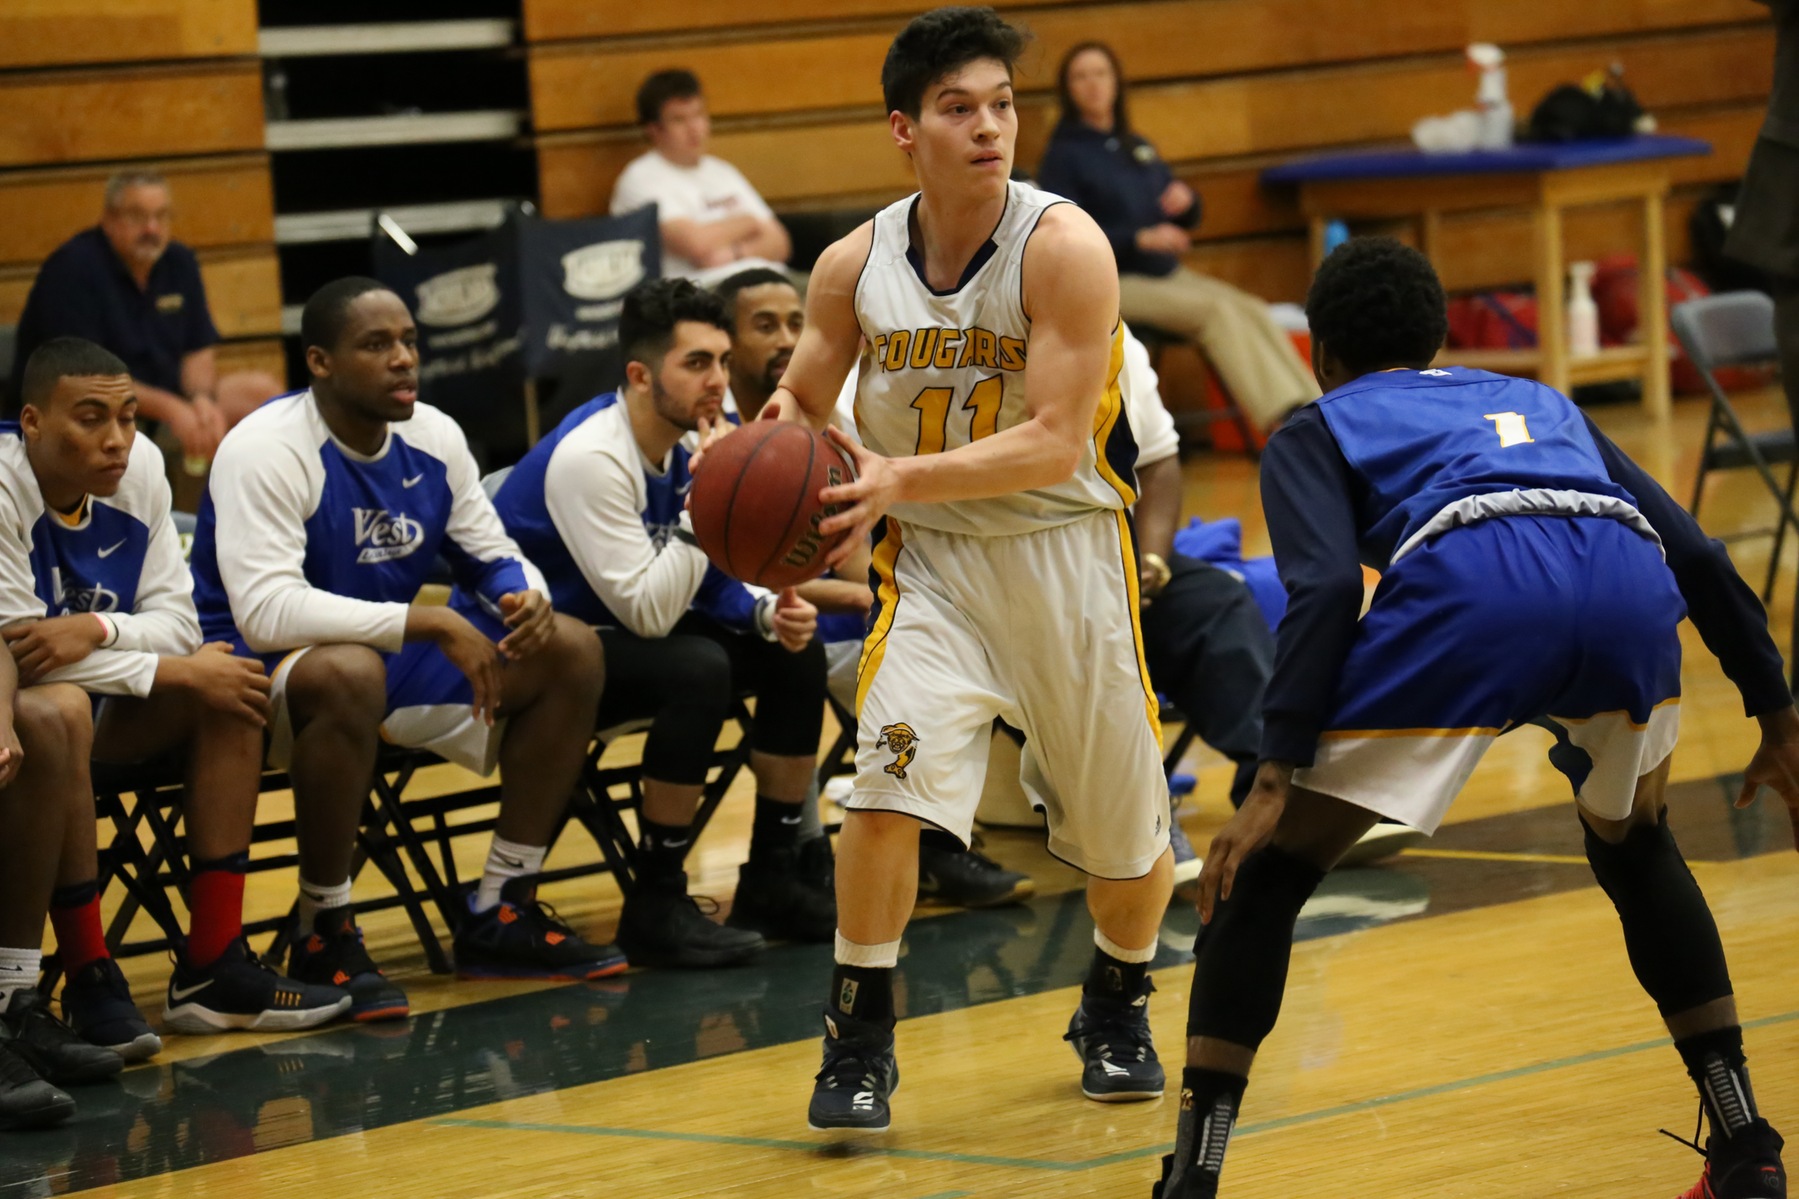 Cougars Comeback for 73-68 Win Over West L.A.